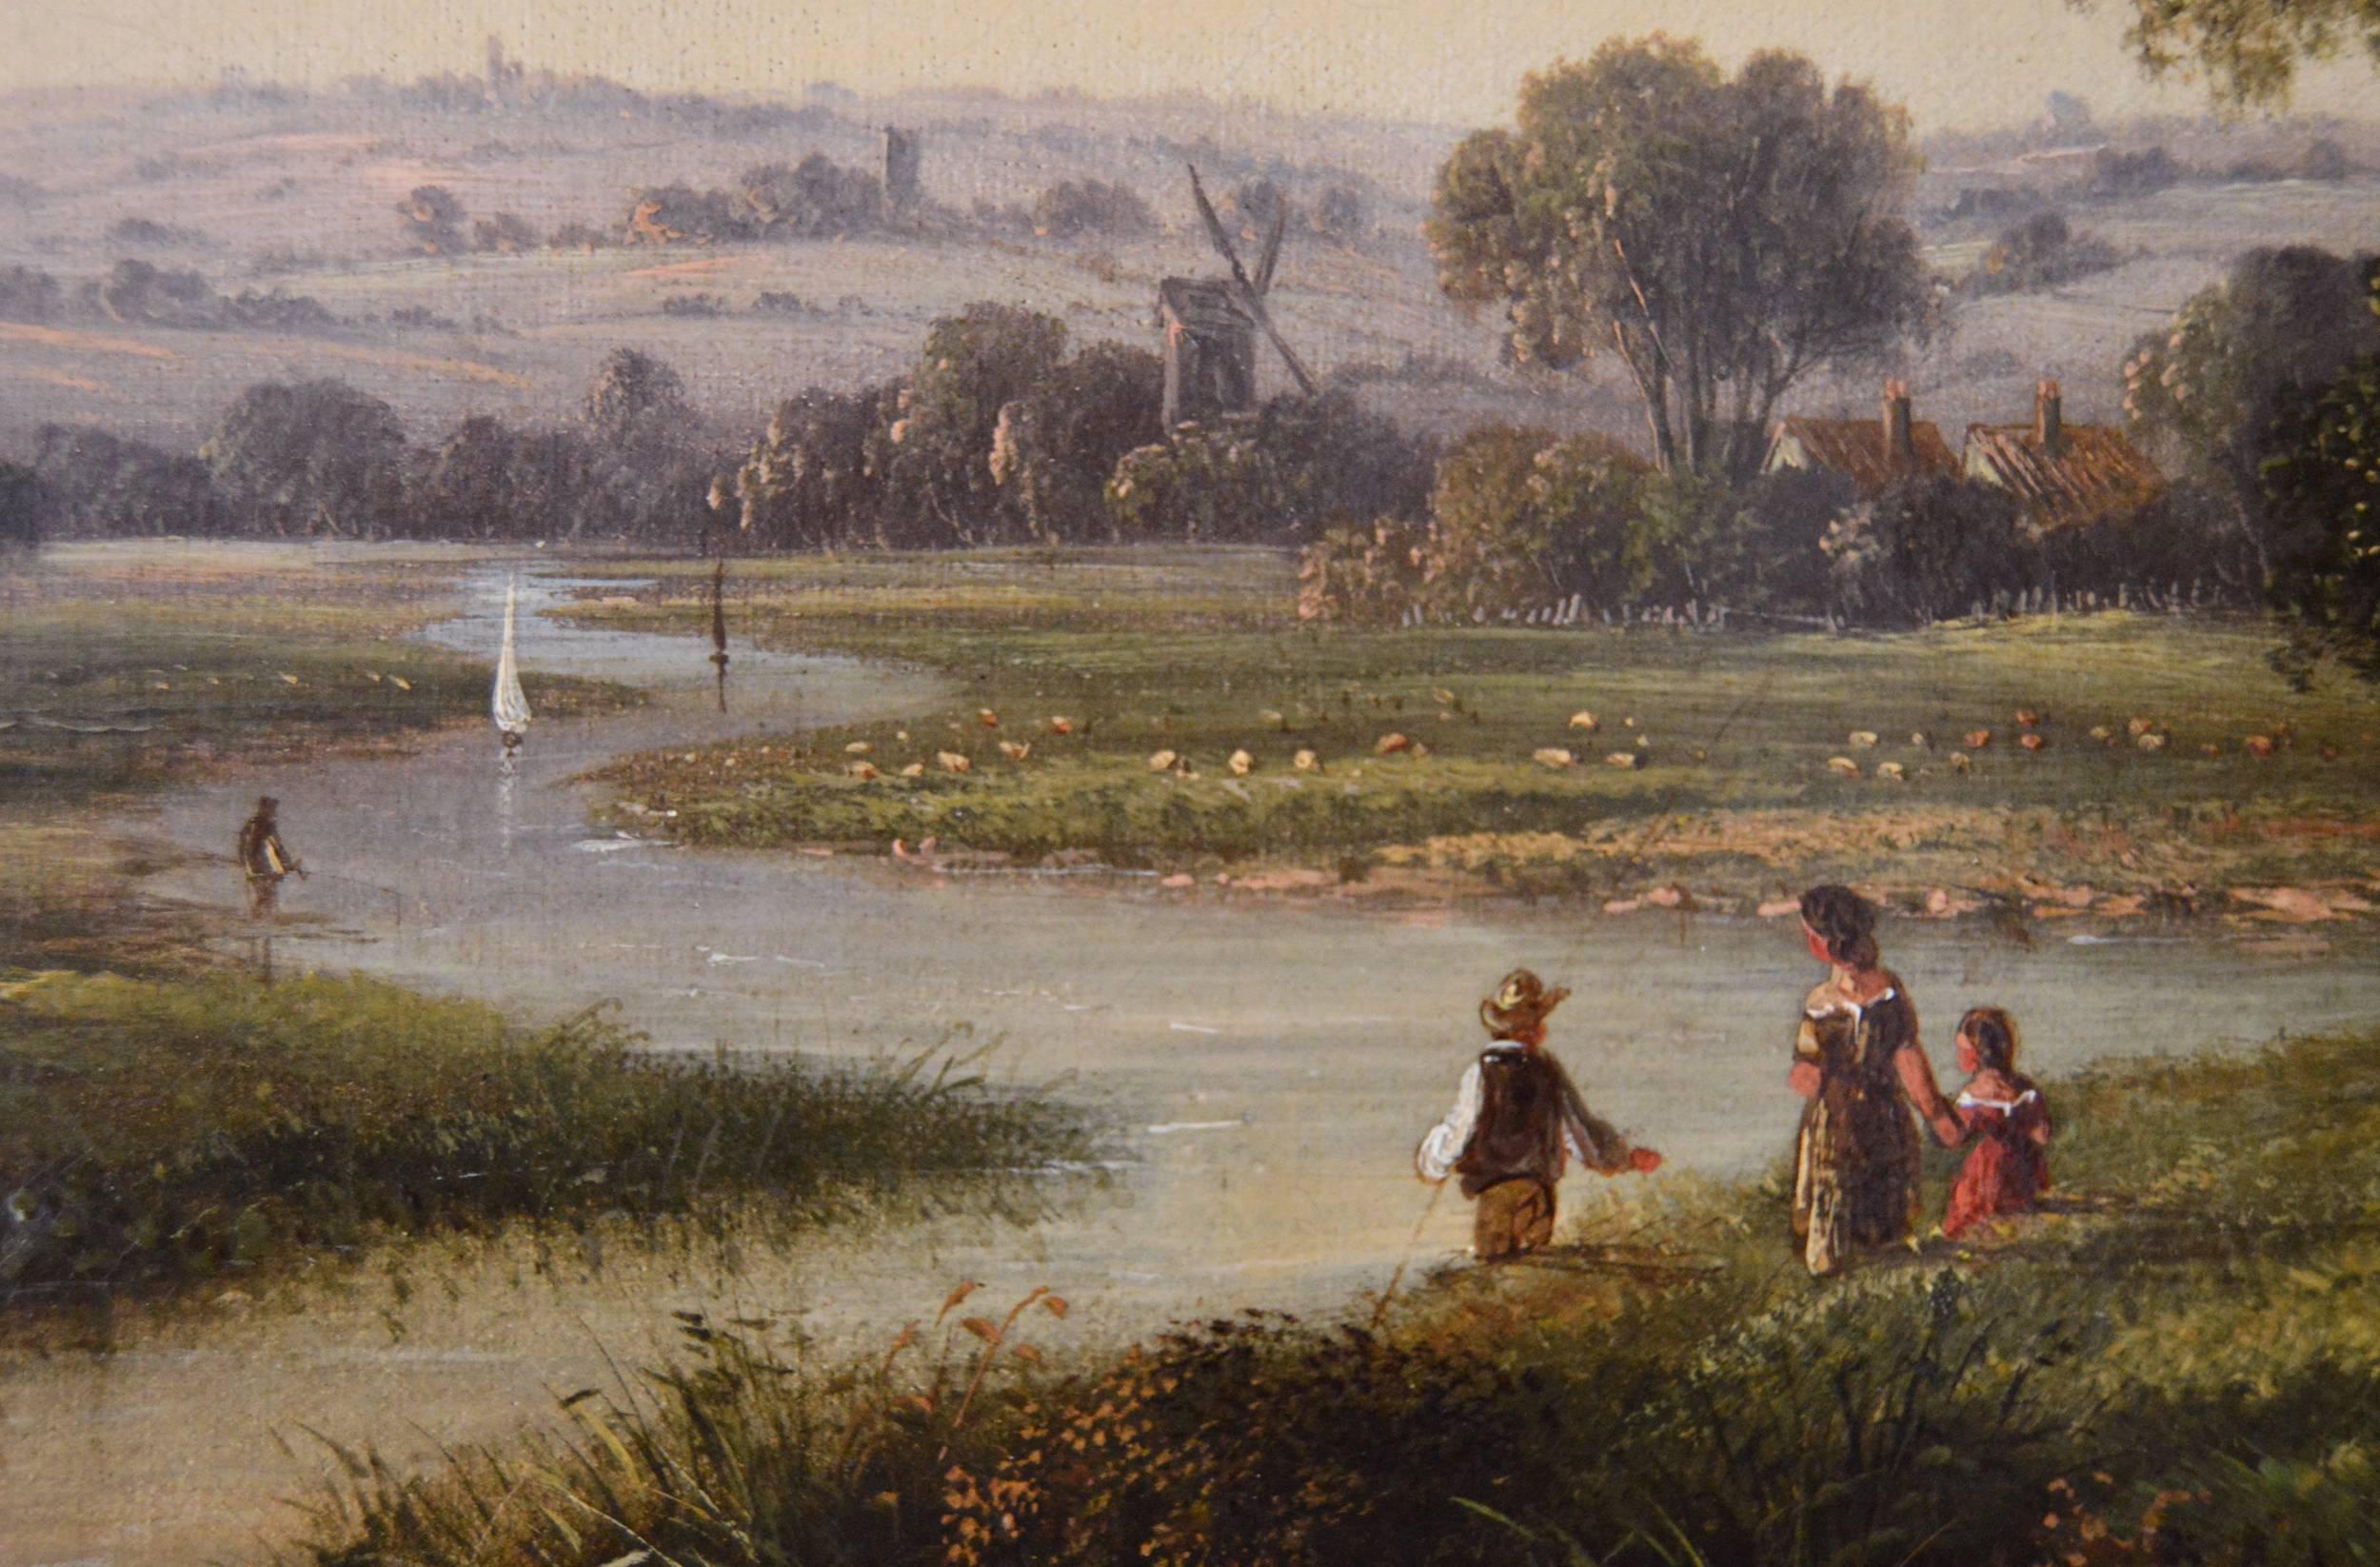 Walter Heath Williams
British, (fl. 1841-1876)
Figures by the River
Oil on canvas
Image size: 15½ inches x 23½ inches
Size including frame: 20½ inches x 28½ inches
Provenance: Mandell’s Gallery, Norwich
Walter Heath Williams was a landscape